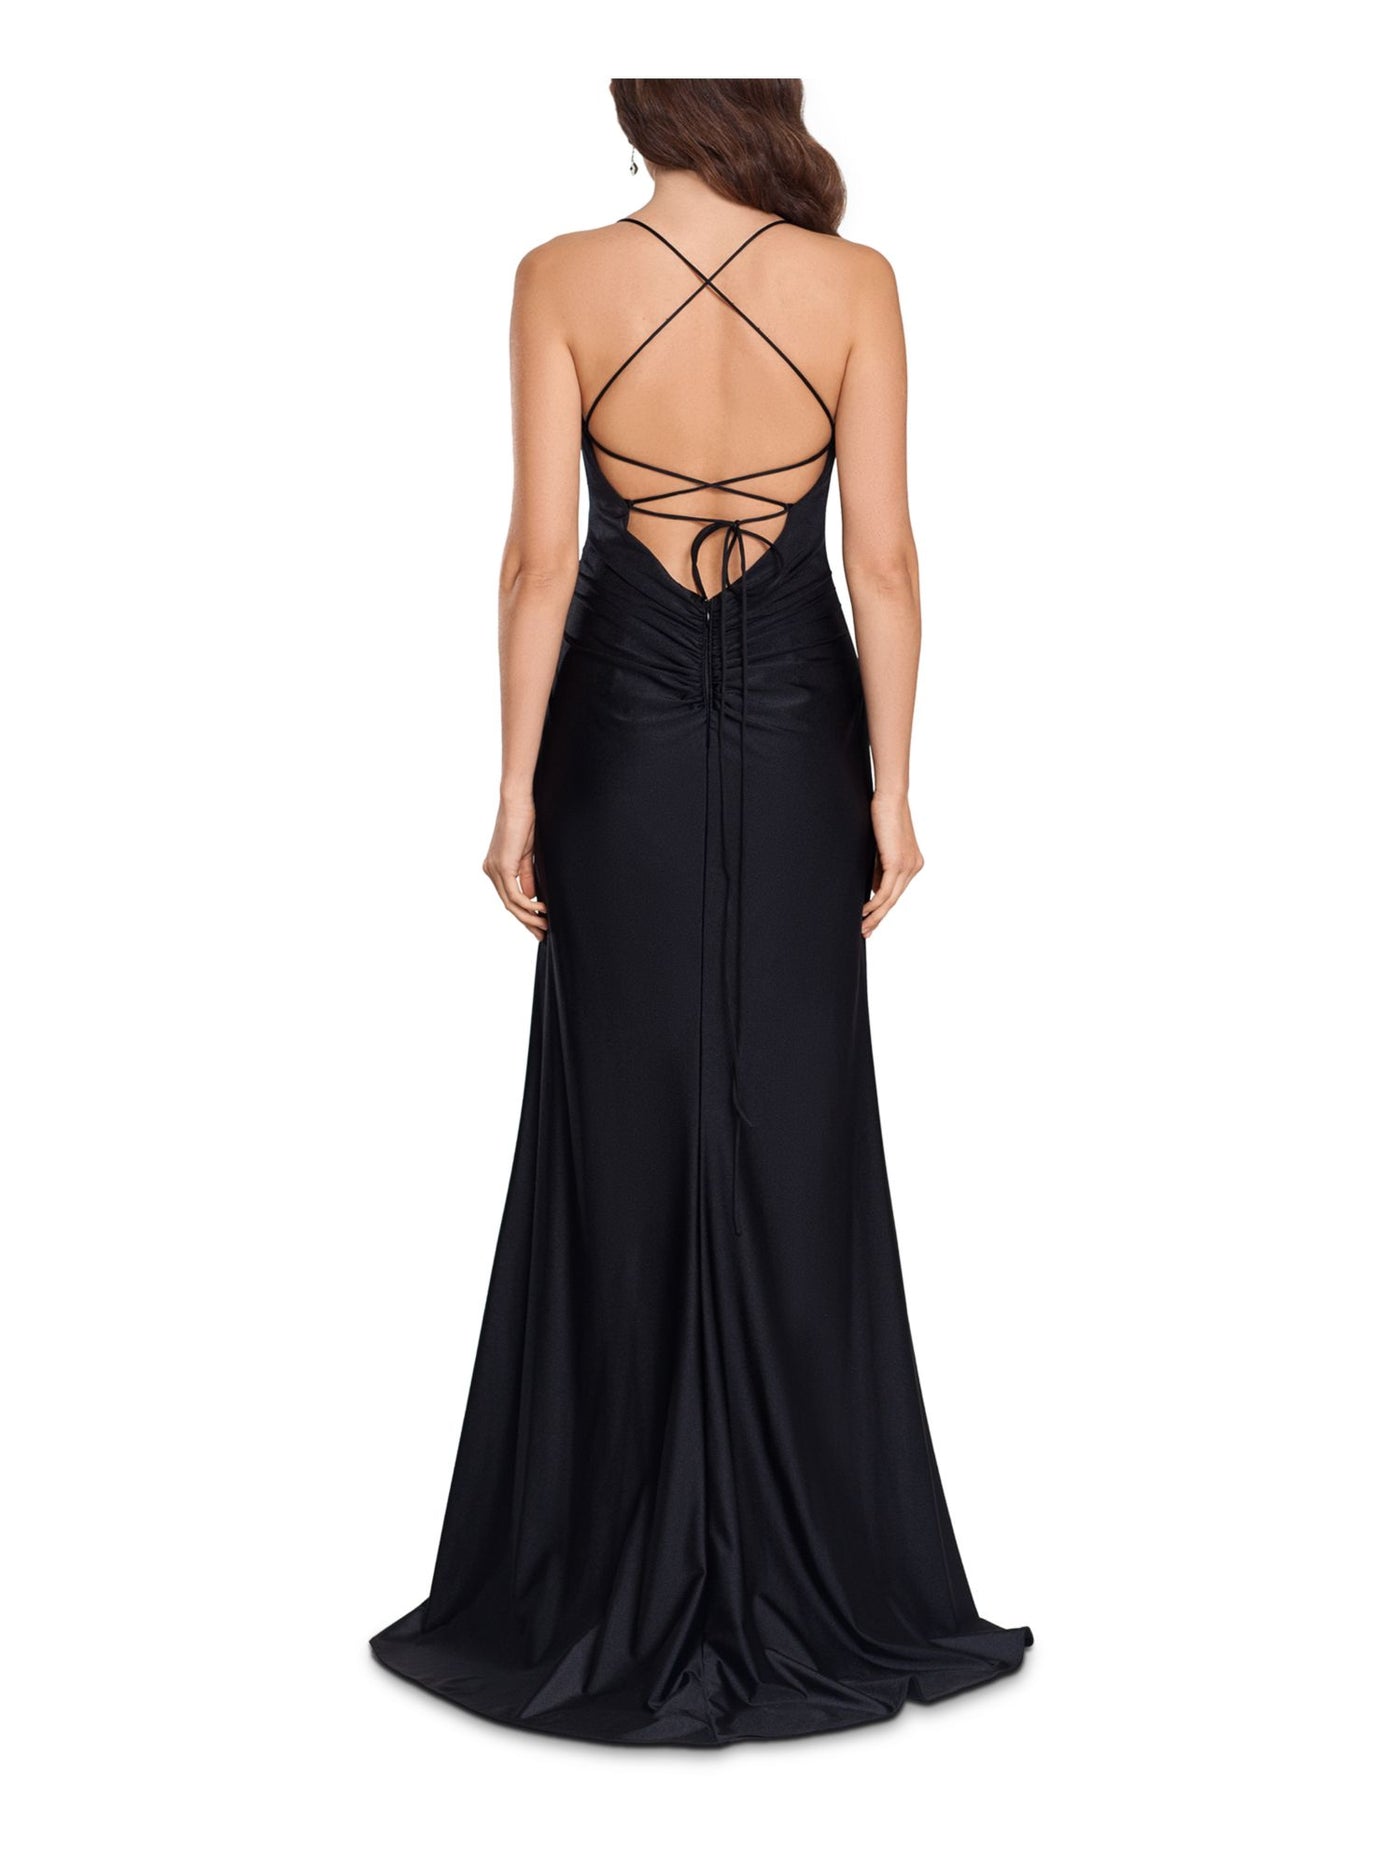 XSCAPE Womens Black Ruched Zippered Padded Gathered Lace Up Back Spaghetti Strap V Neck Full-Length Formal Gown Dress 4